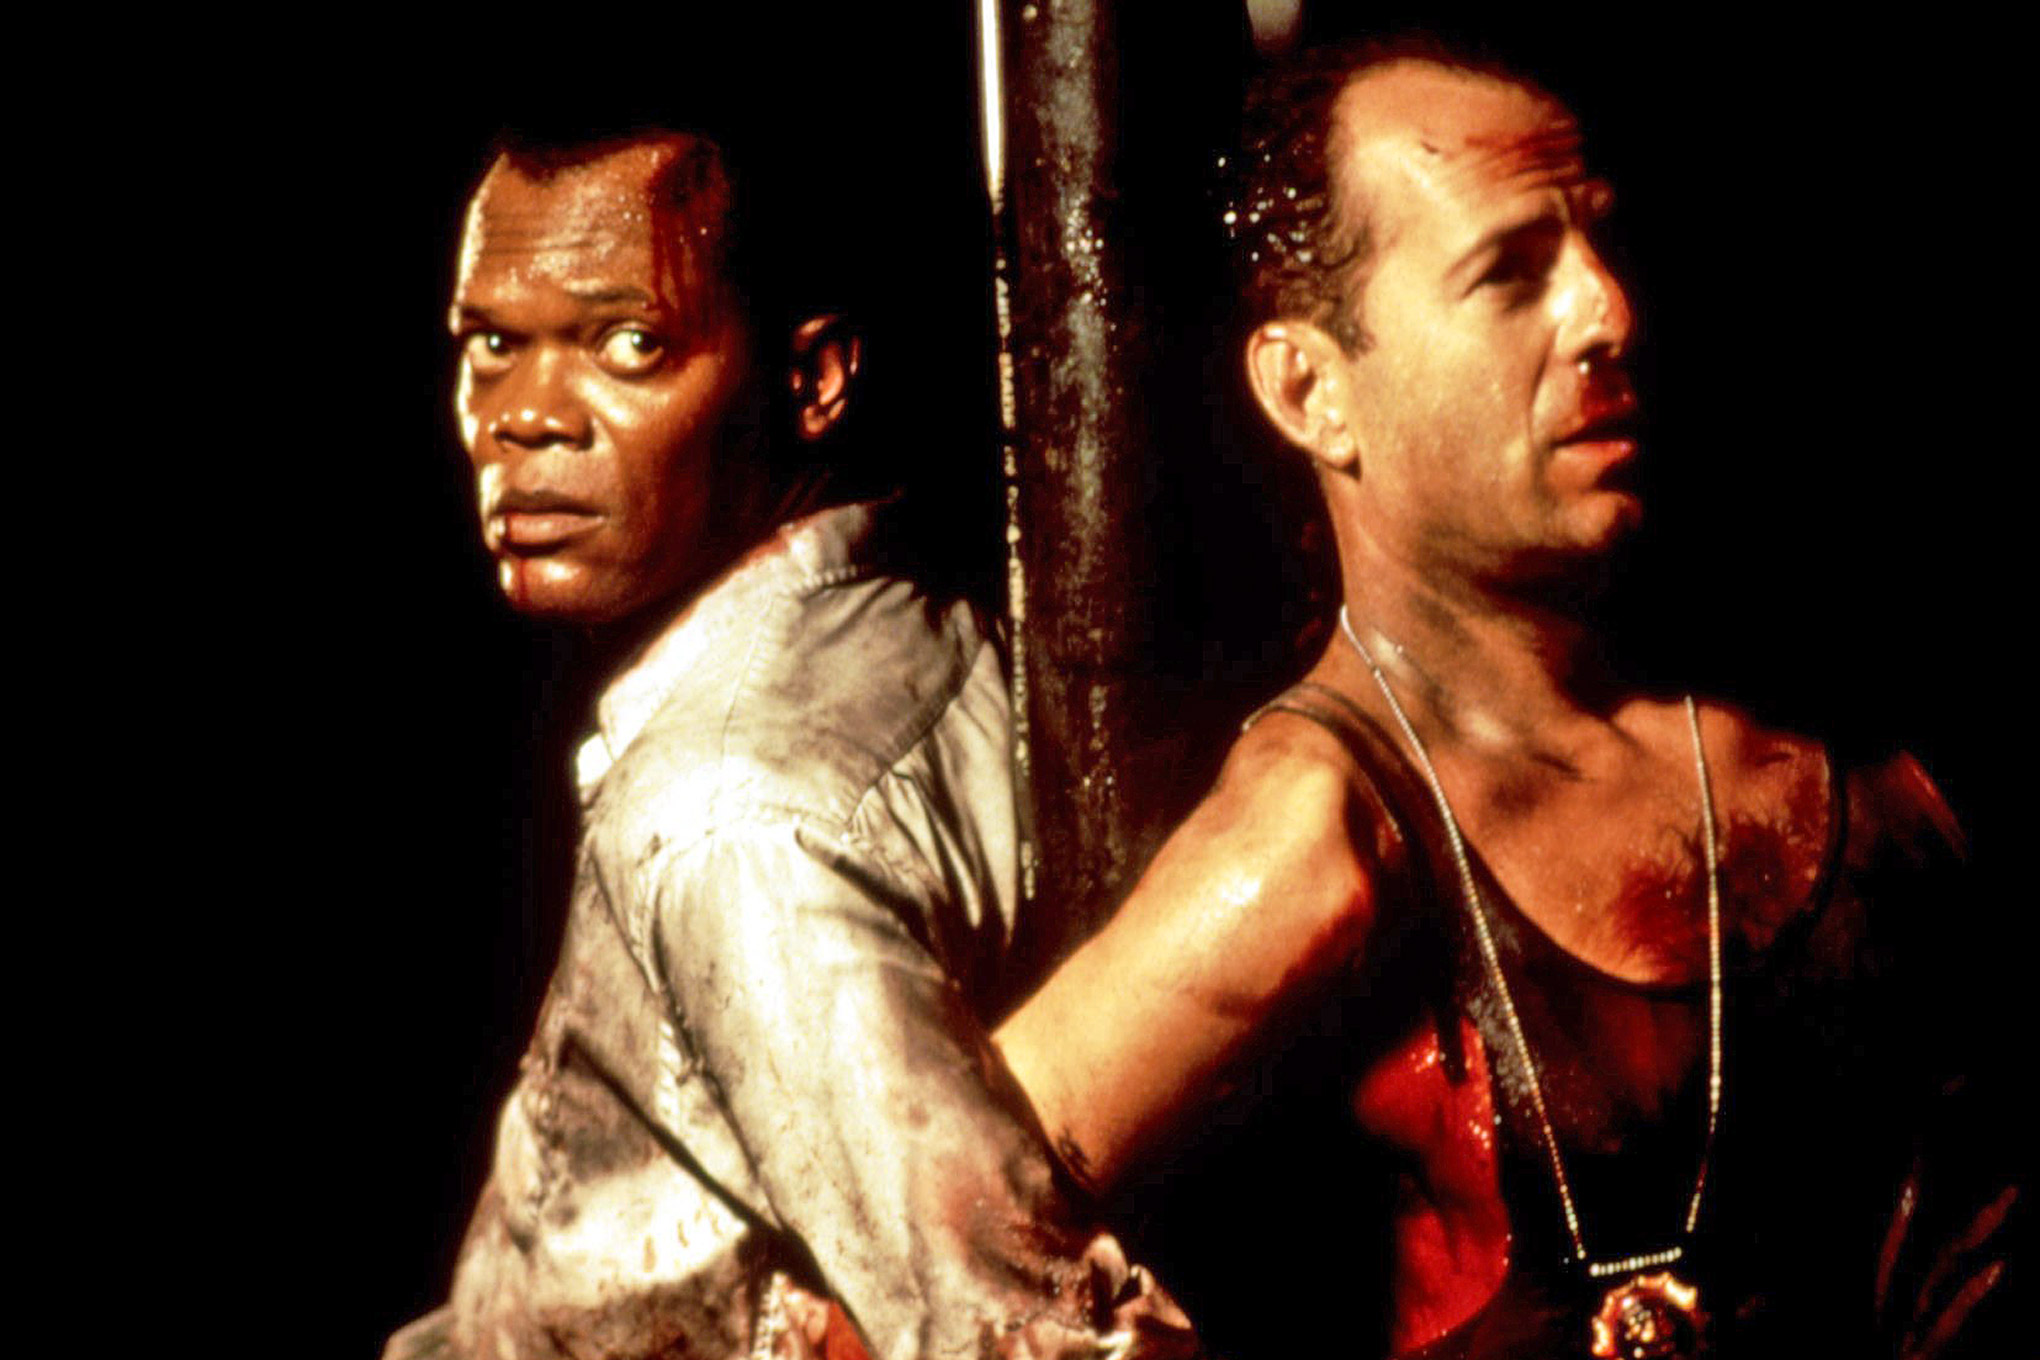 Die Hard With A Vengeance - In this alternative ending McClane did not have a fluke, and Simon got away.  Some time after the events of the film, we find a triumphant Simon Gruber hiding out in Hungary after killing all partners, girlfriend included. There Simon is approached by McClane who was a suspect, had been interrogated by the FBI and forced out of the NYPD. He then forces Simon to play a game of Russian Roulette called McClane says, using a mini rocket launcher with the sights and targeting arrows removed. After winning the game and forcing Simon to shoot himself in the chest with a rocket, it’s revealed that McClane was wearing a flak jacket.